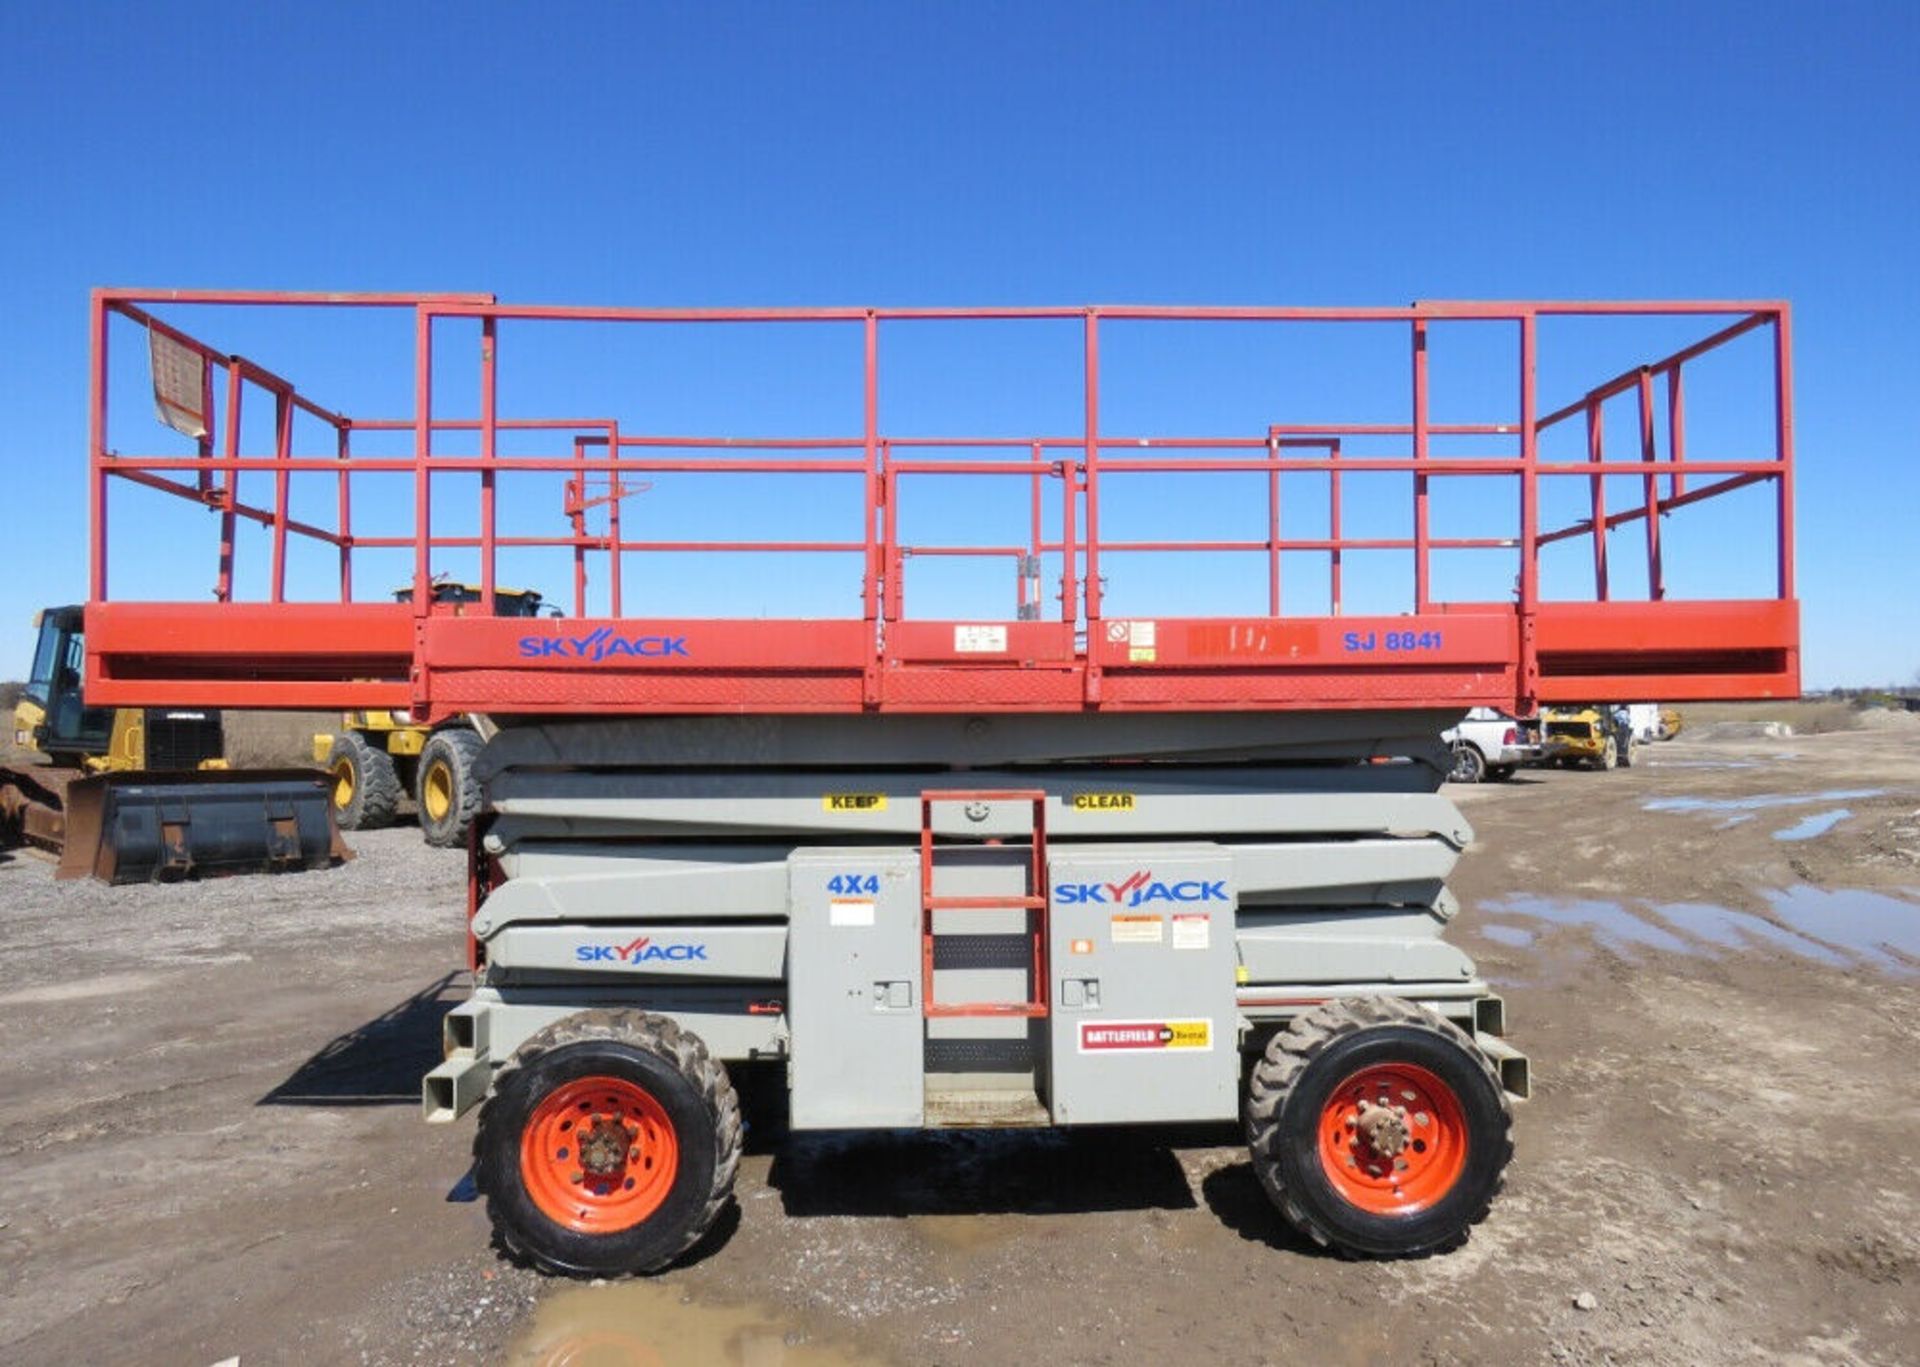 2006 SkyJack Scissor Lift model SJ8841 - 41 feet lift with Rugged Tires for rough Diesel - Image 2 of 3